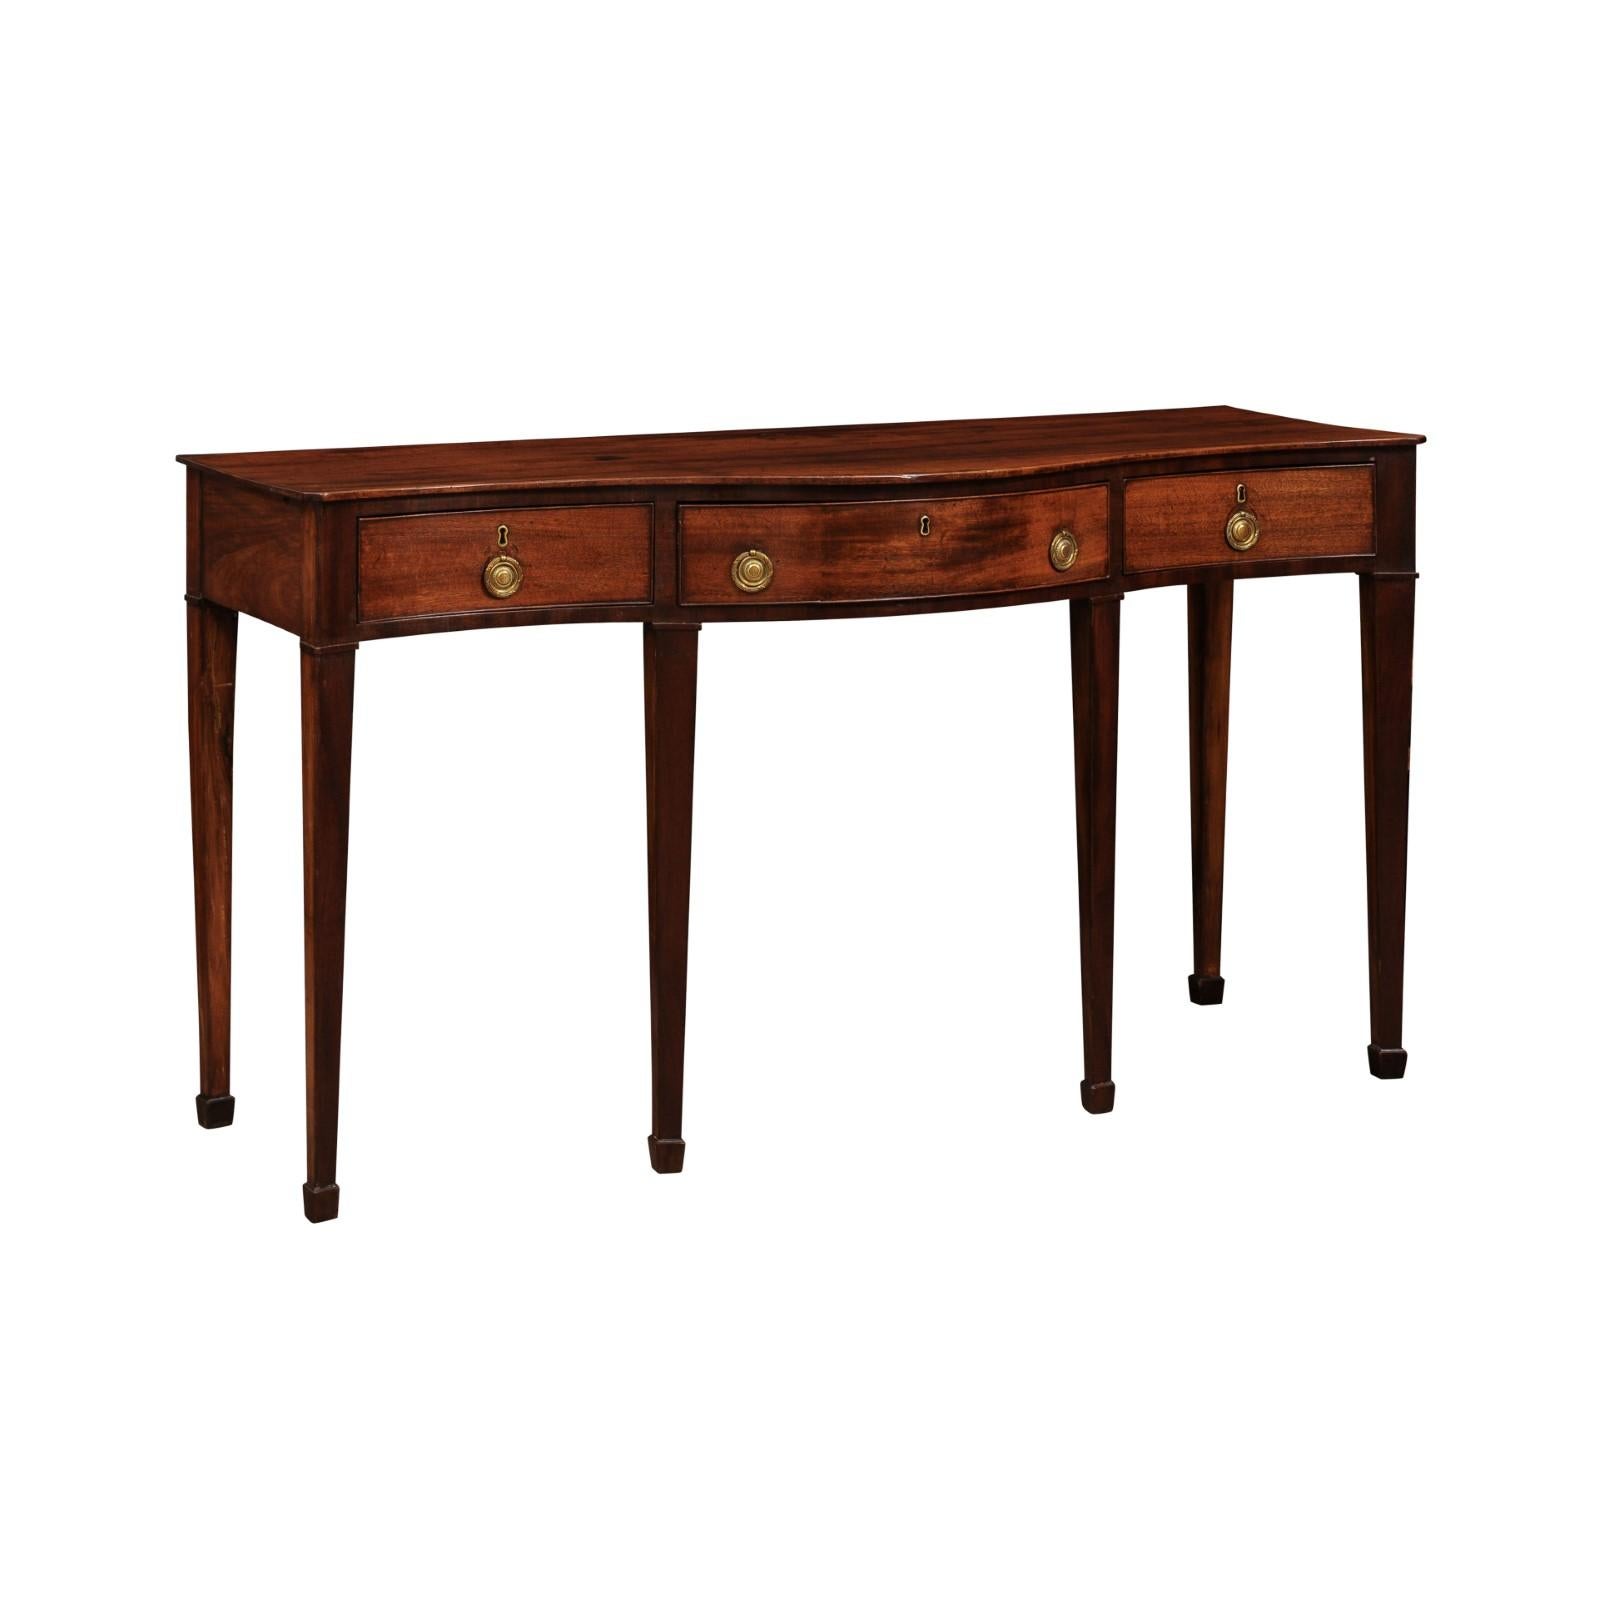 19th Century Mahogany Serving Serpentine Table with 3 Drawers and Square Tapering Legs